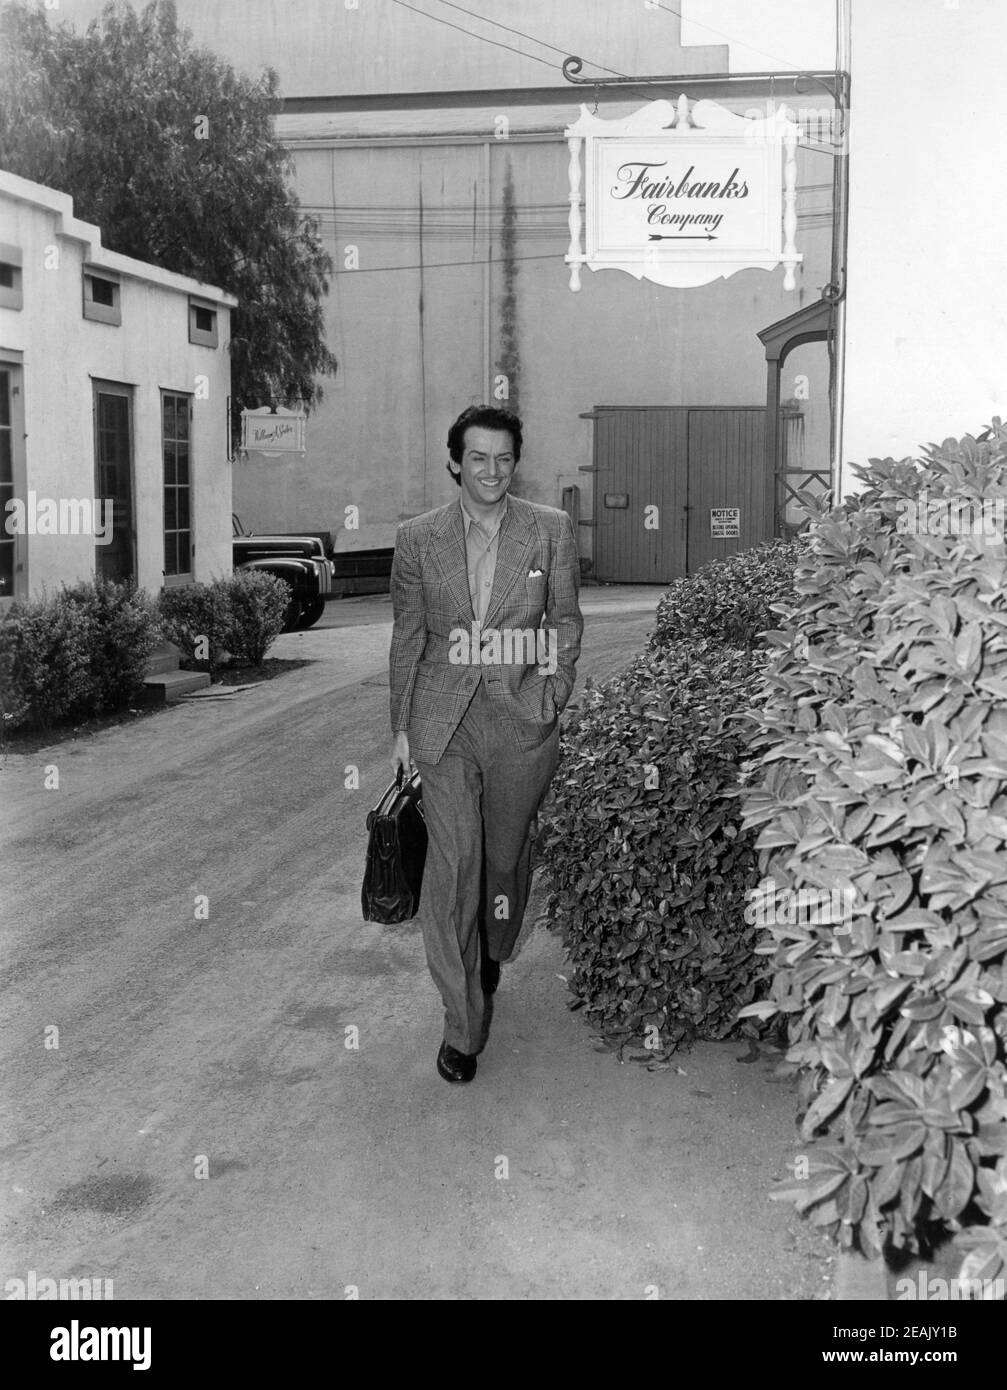 DOUGLAS FAIRBANKS Jr leaves his production office on the Universal Studios Lot at the end of a day's filming candid during making of THE EXILE 1947 director MAX OPHULS producer Douglas Fairbanks Jr Fairbanks Company / Universal - International Stock Photo